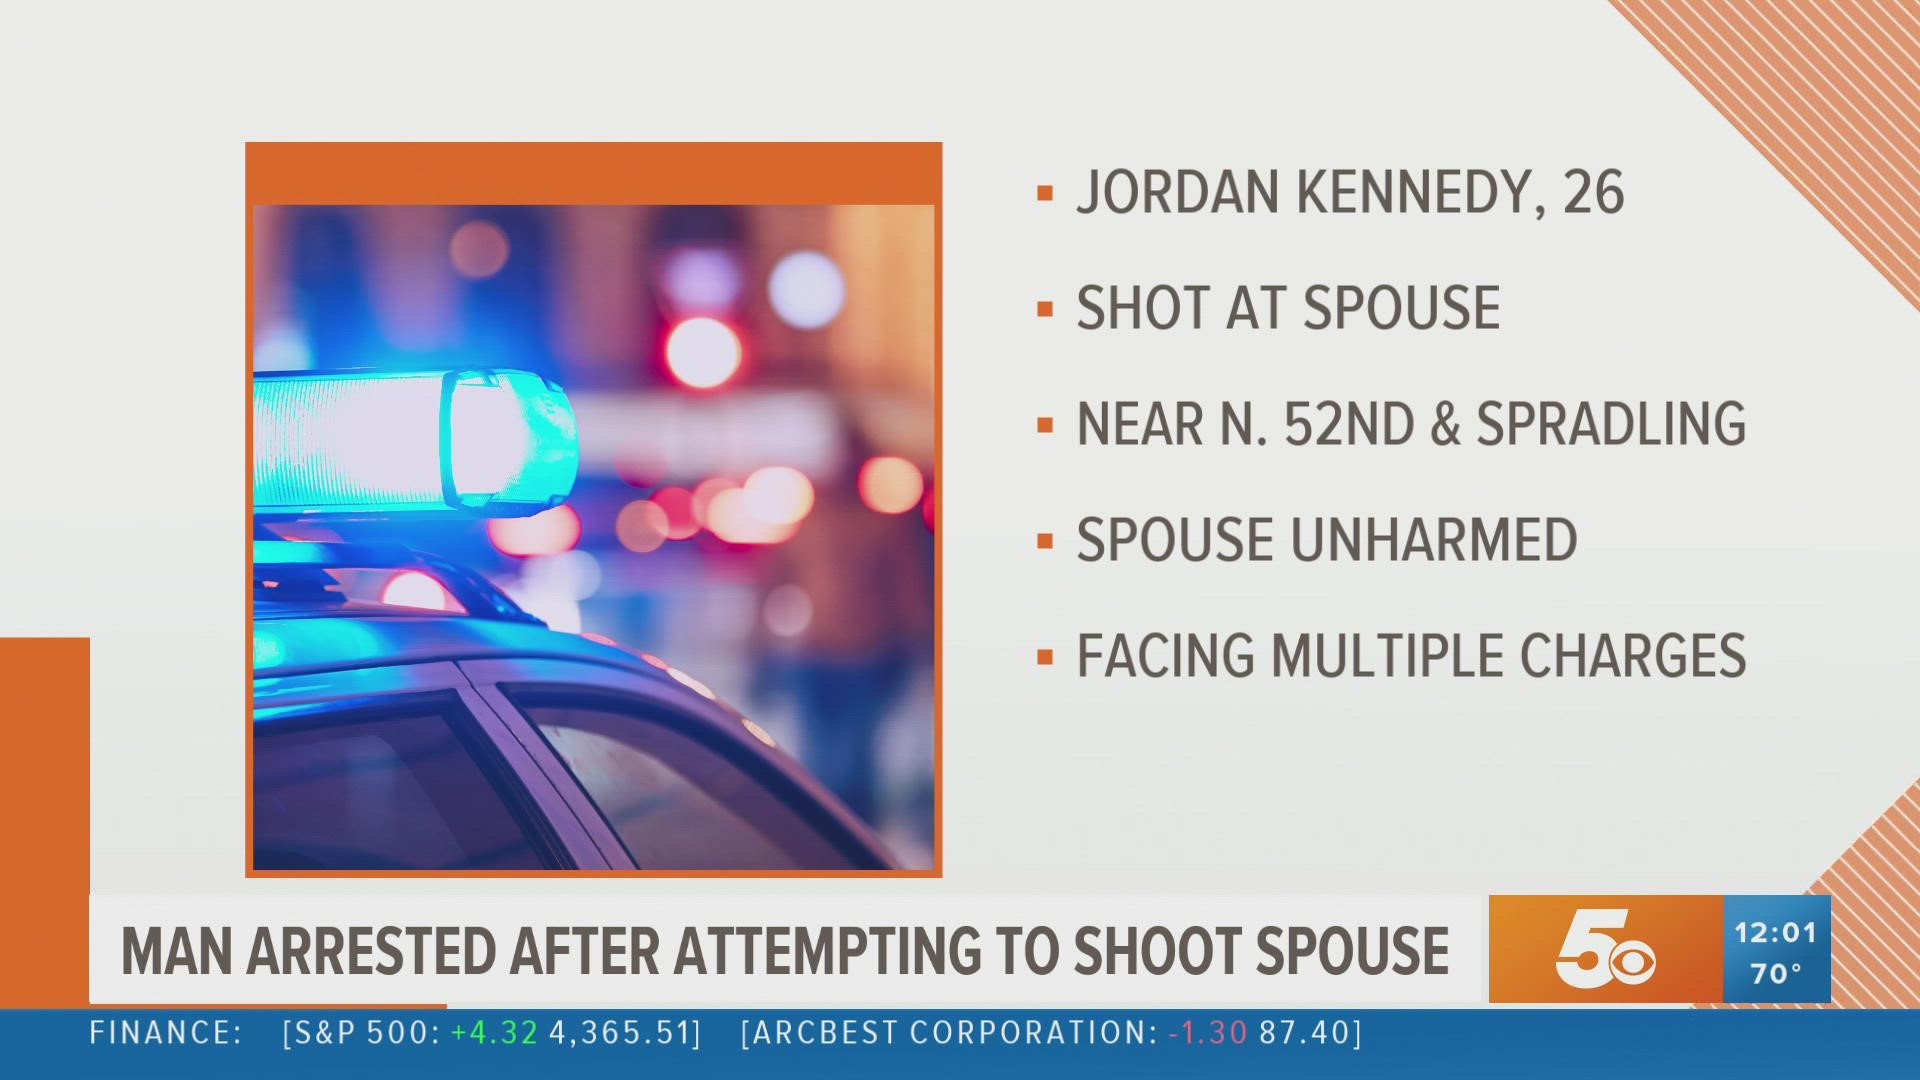 Police say that on Monday, Oct. 11, 26-year-old Jordan Kennedy allegedly shot at his spouse.